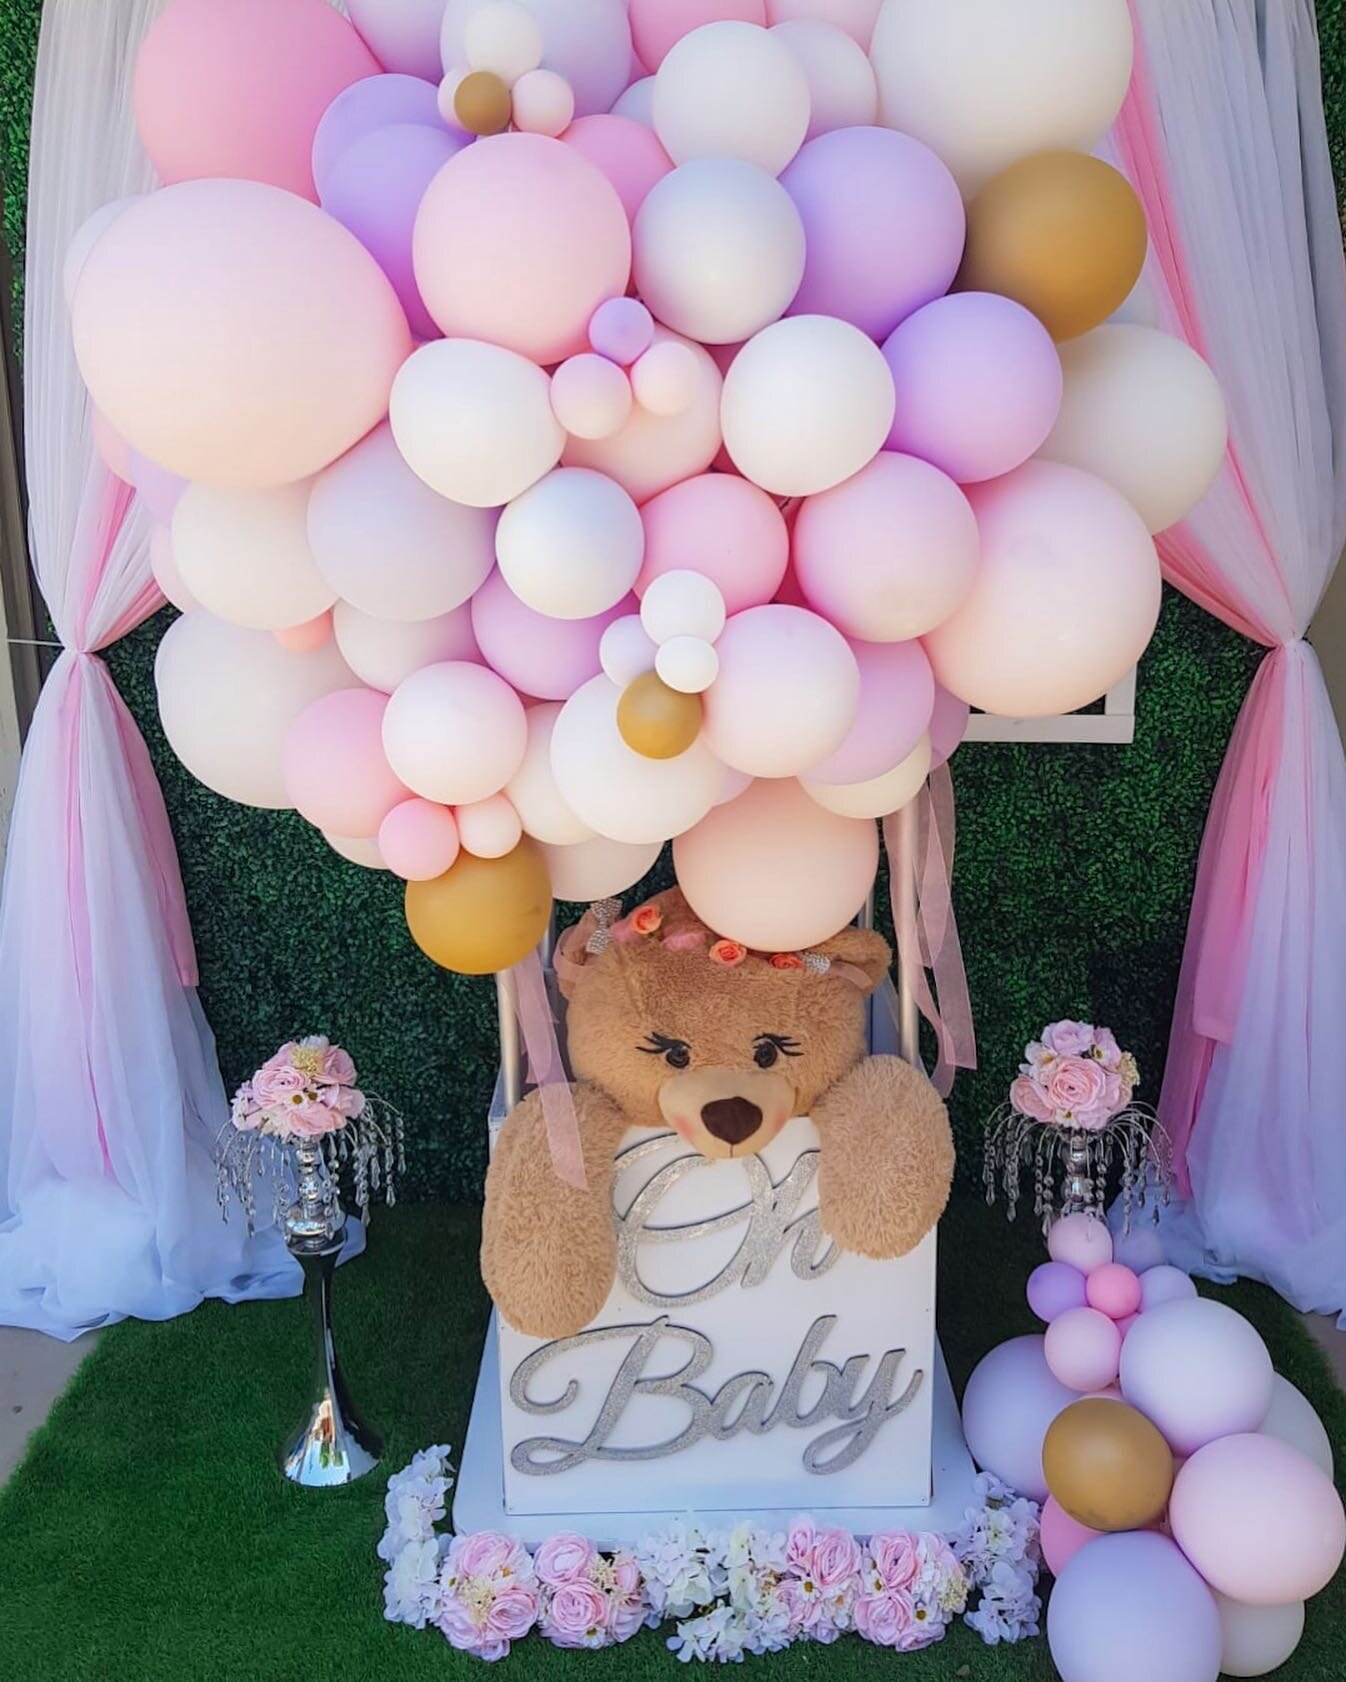 Contact us for beautiful and affordable  decorations! 🎊
-
-
Follow @themaintabledecor for updates on events and promotions! 🎈
-
-
-
#weddingballons #balloons #balloonstylist #bachatadancing #eventrentals #weddings #bride #weddingvenue #banquets #de